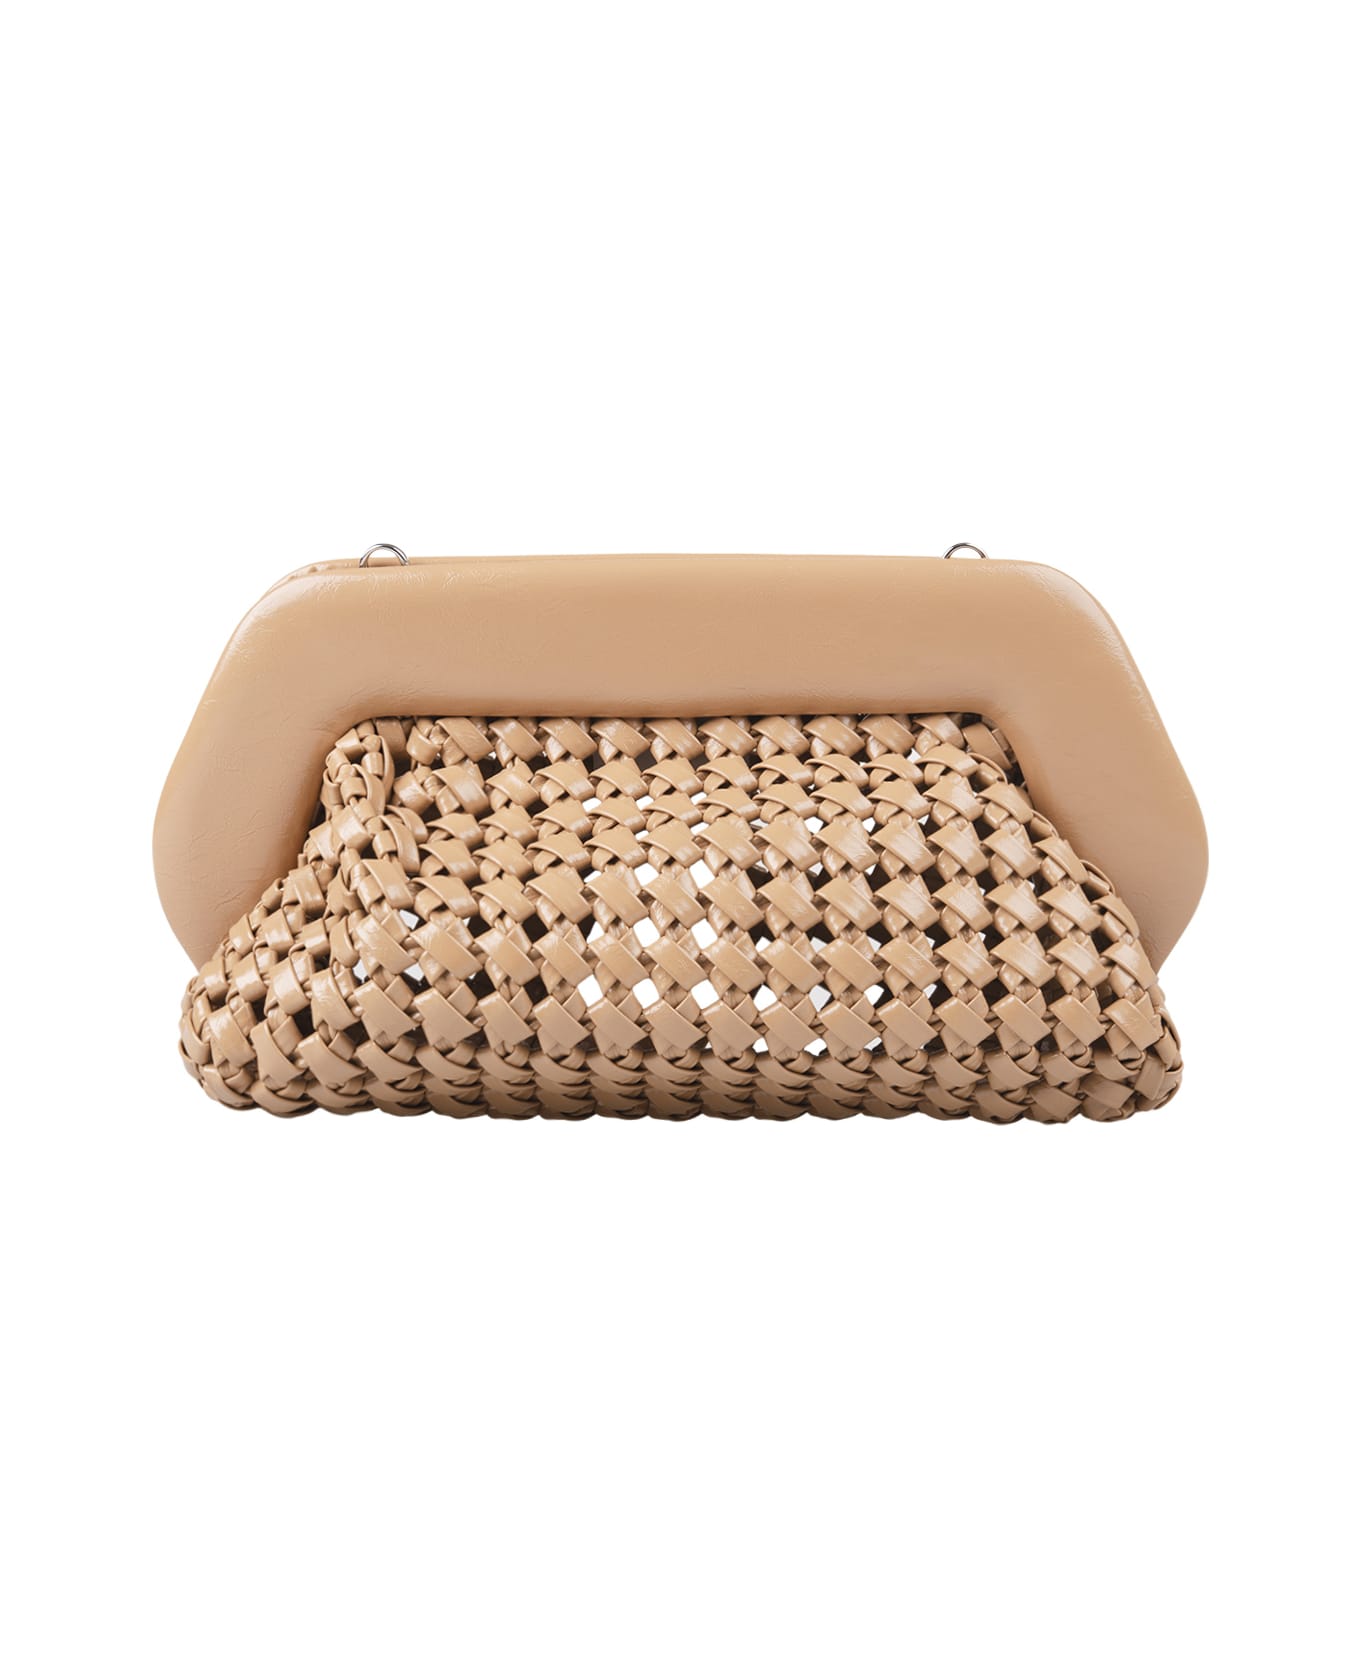 THEMOIRè Clay Bios Knots Shiny Clutch Bag - Brown クラッチバッグ